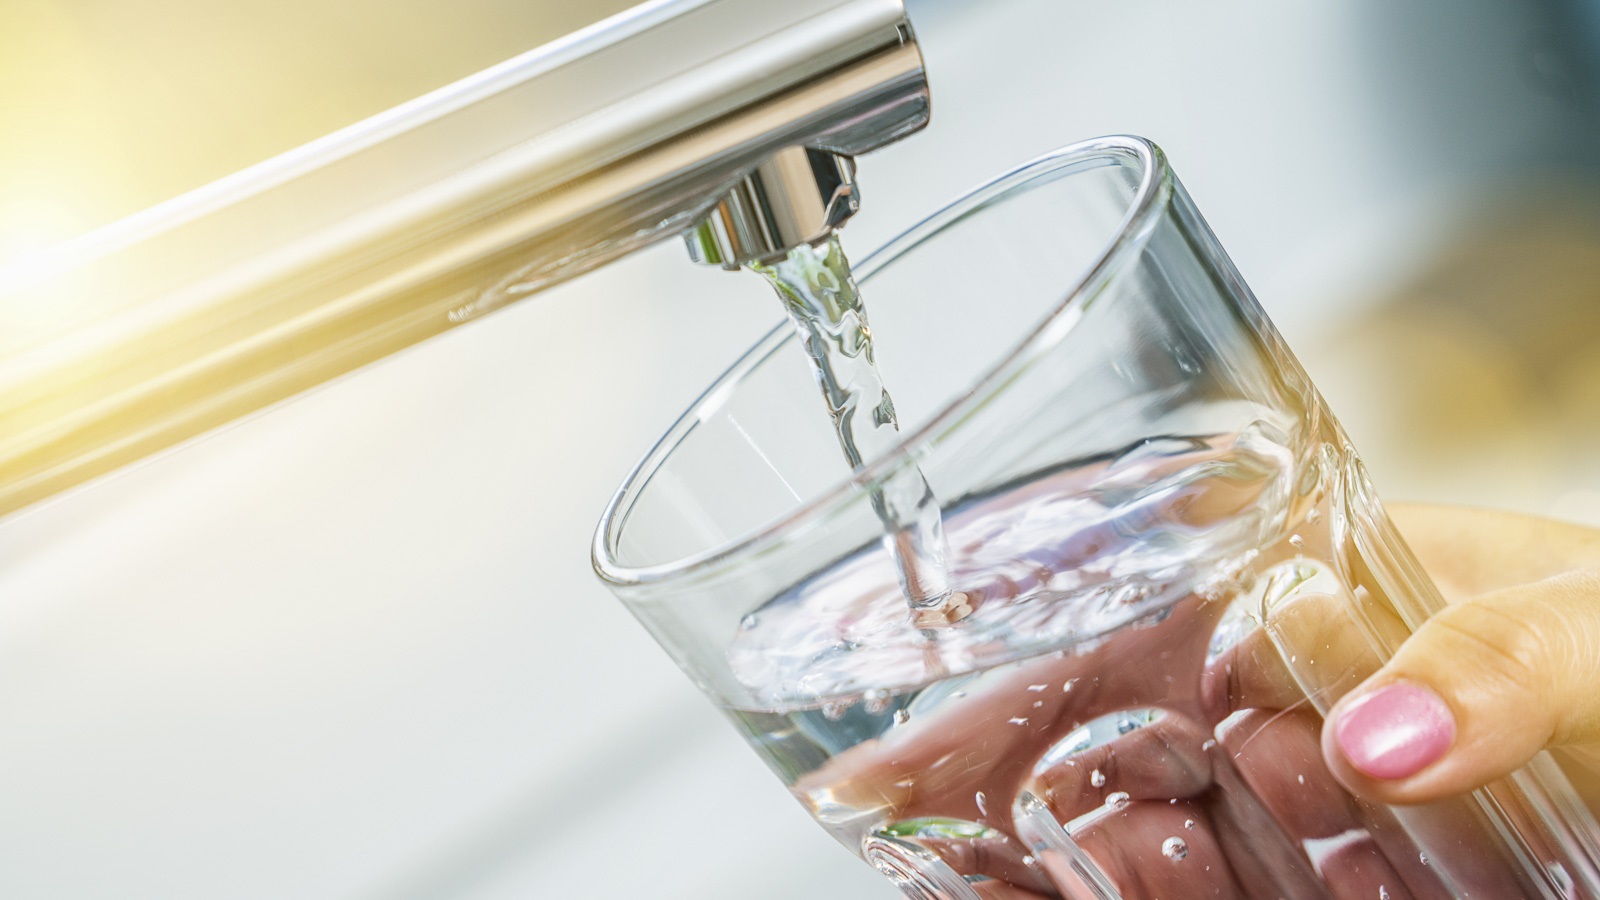 Filling a glass of water from faucet. (Image by r.classen/Shutterstock.)